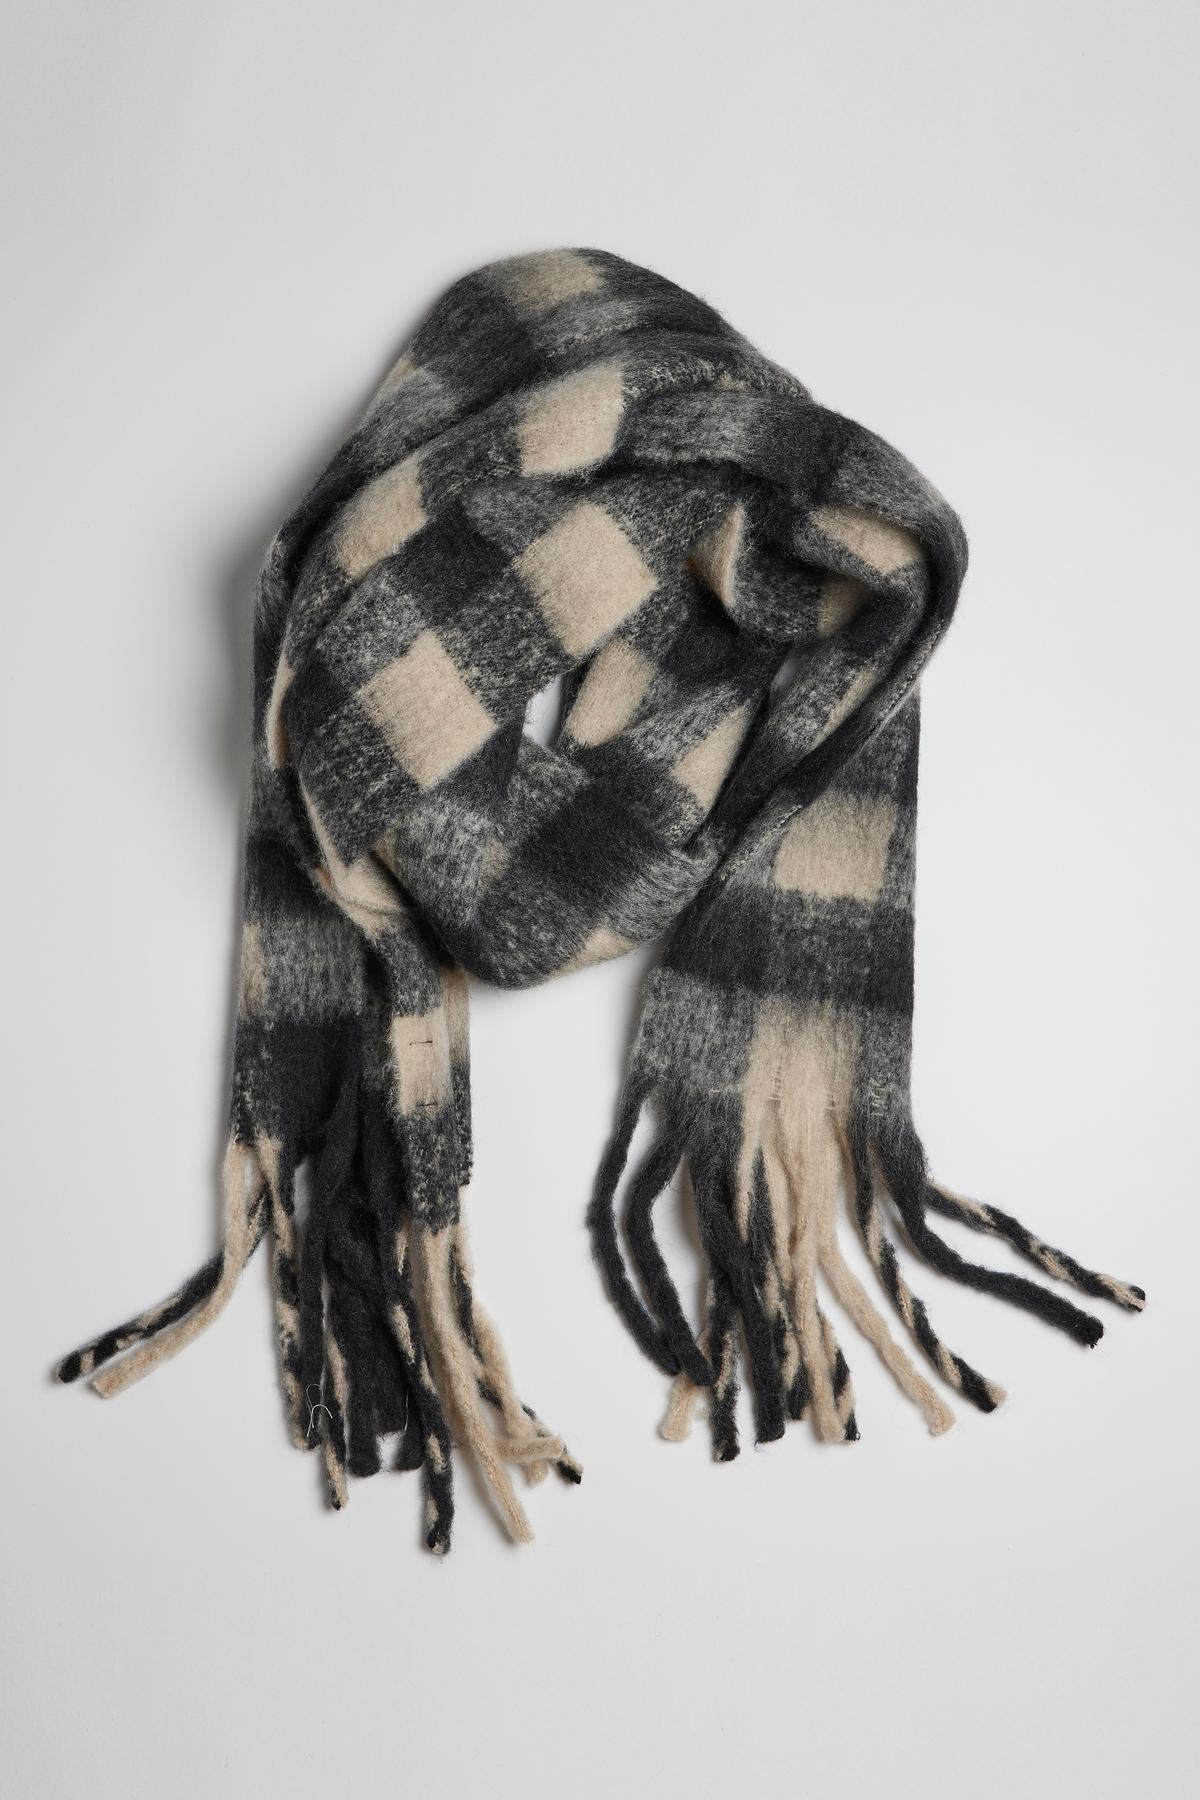 An ELLE plaid scarf from Velvet by Graham & Spencer, with fringe ends, offering warmth and comfort.-35211033477313